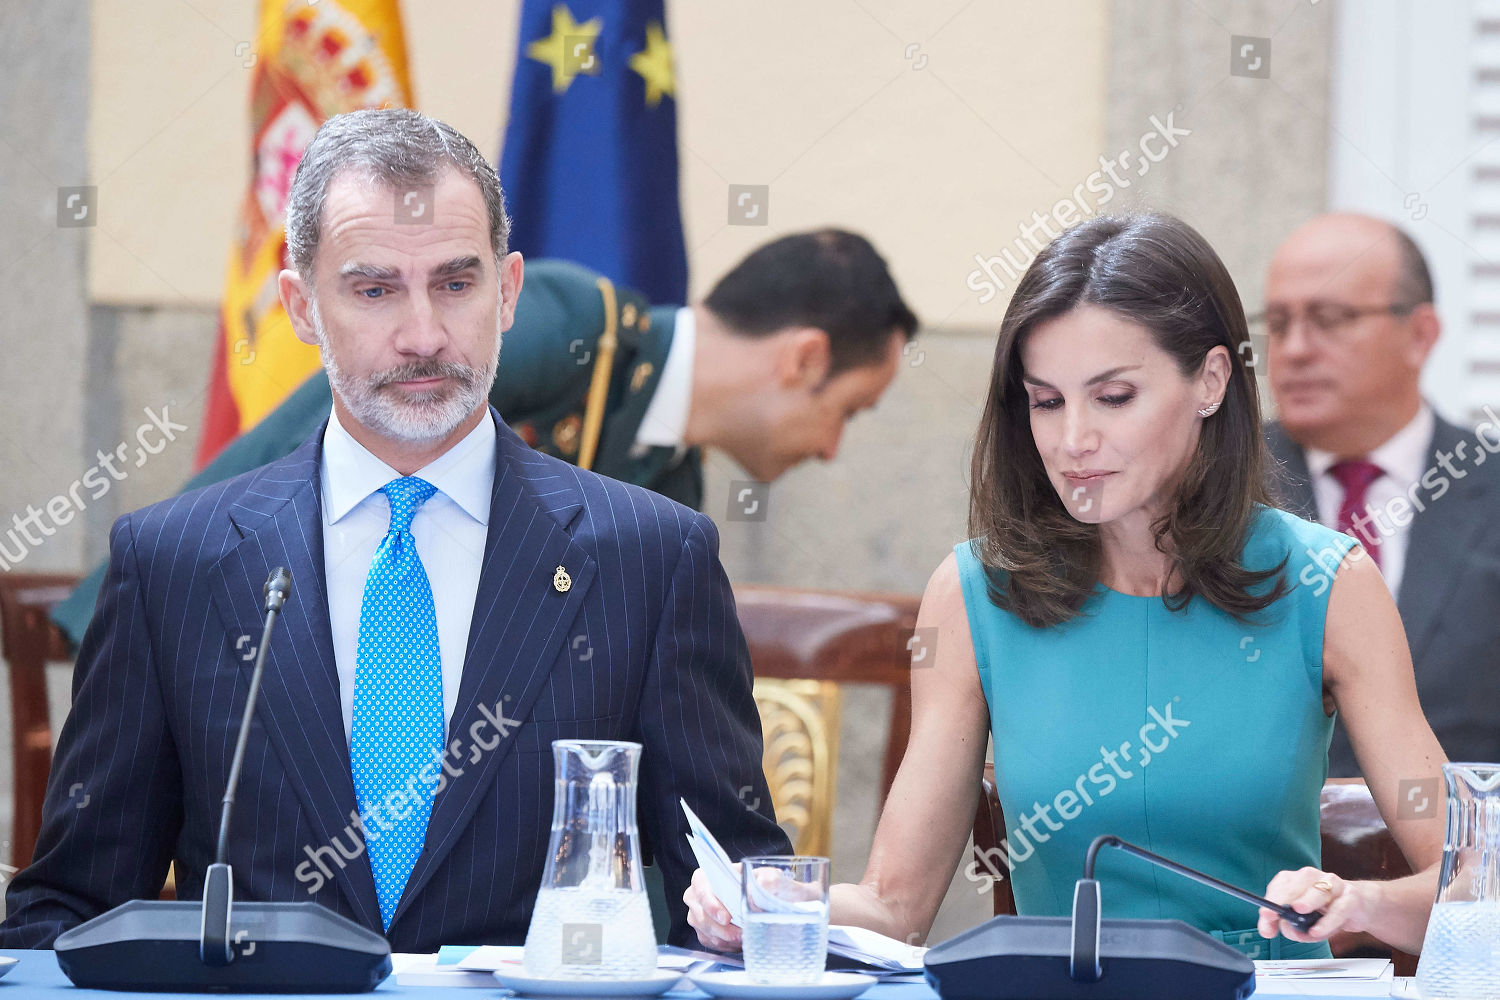 meeting-of-members-of-the-patronages-of-the-princess-of-asturias-foundation-madrid-spain-shutterstock-editorial-10321808r.jpg